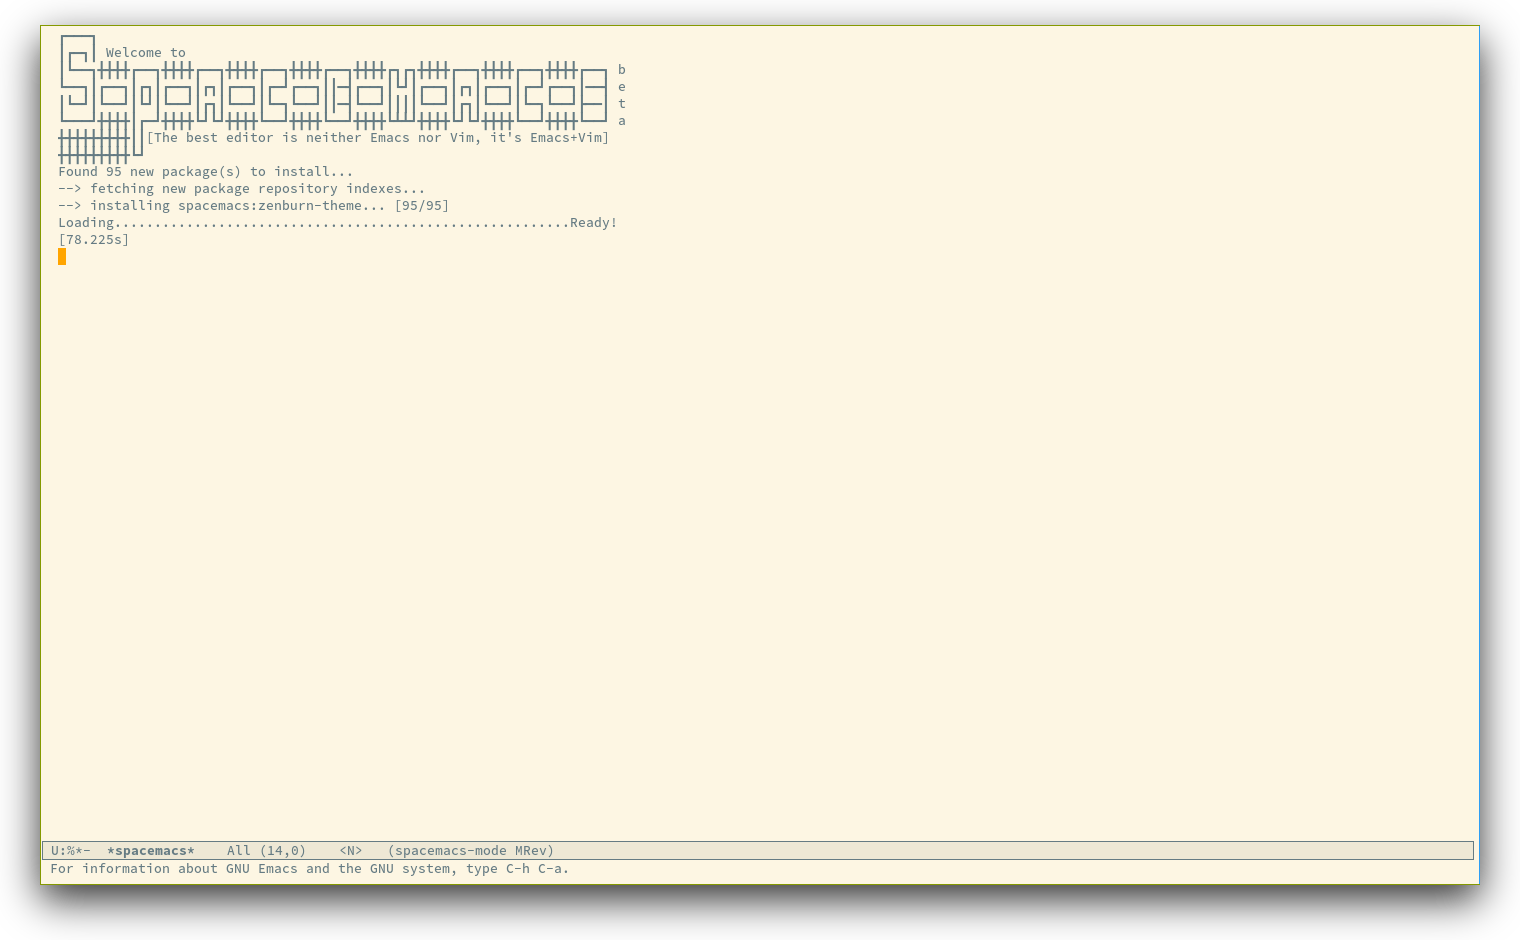 /TakeV/spacemacs/media/commit/2409a3dfc013d53fd3d7b9a73d818b1cc2243ed6/doc/img/spacemacs-startup.png